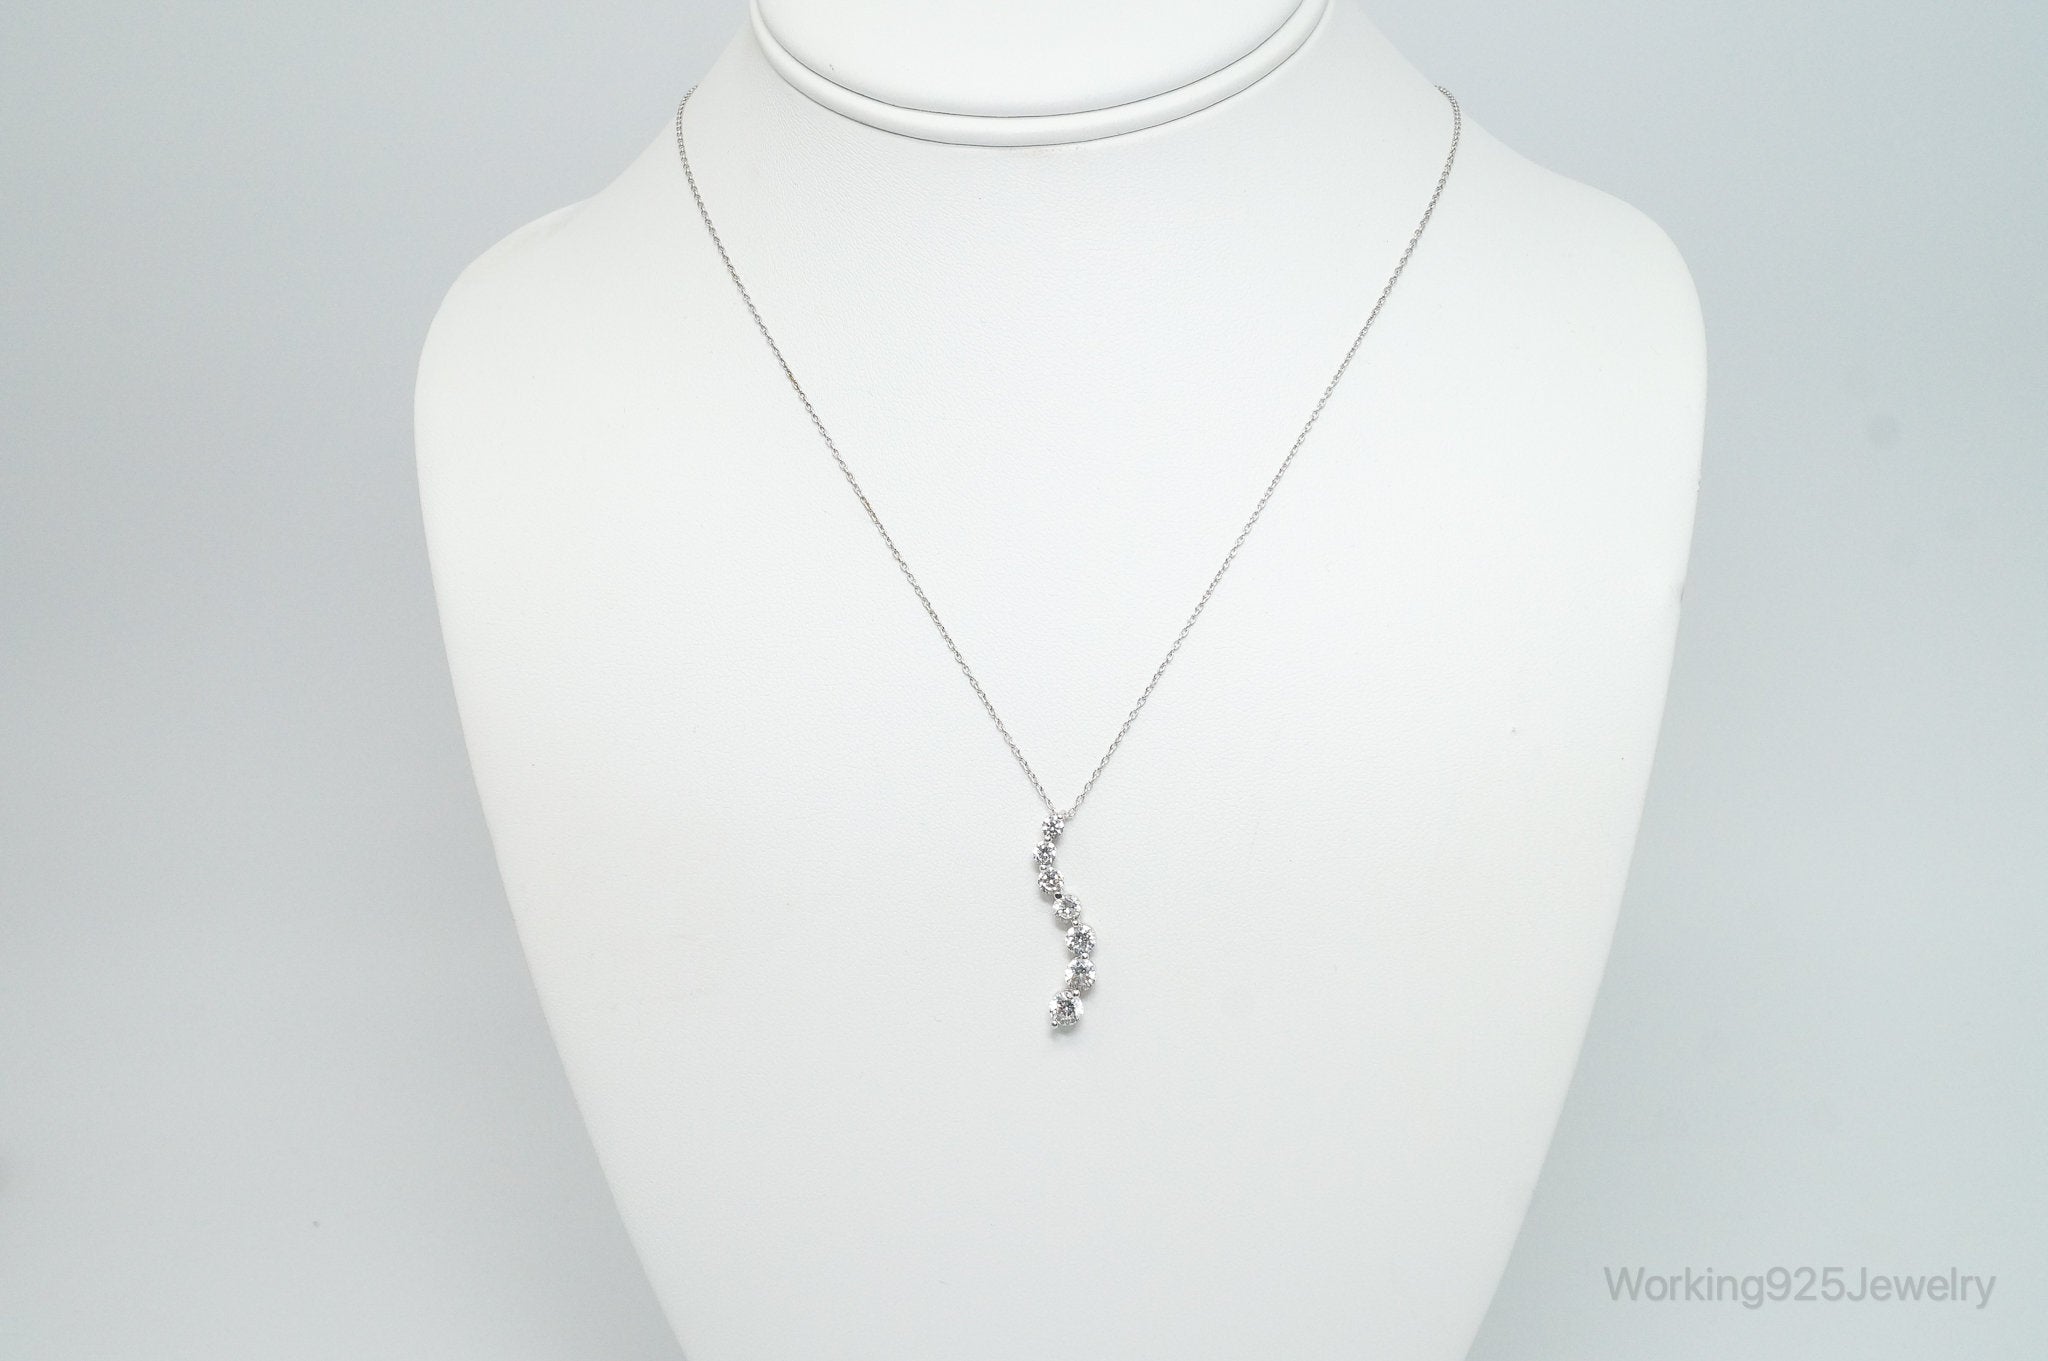 Vintage Cubic Zirconia Journey Necklace Sterling Silver - 18 Inch Chain